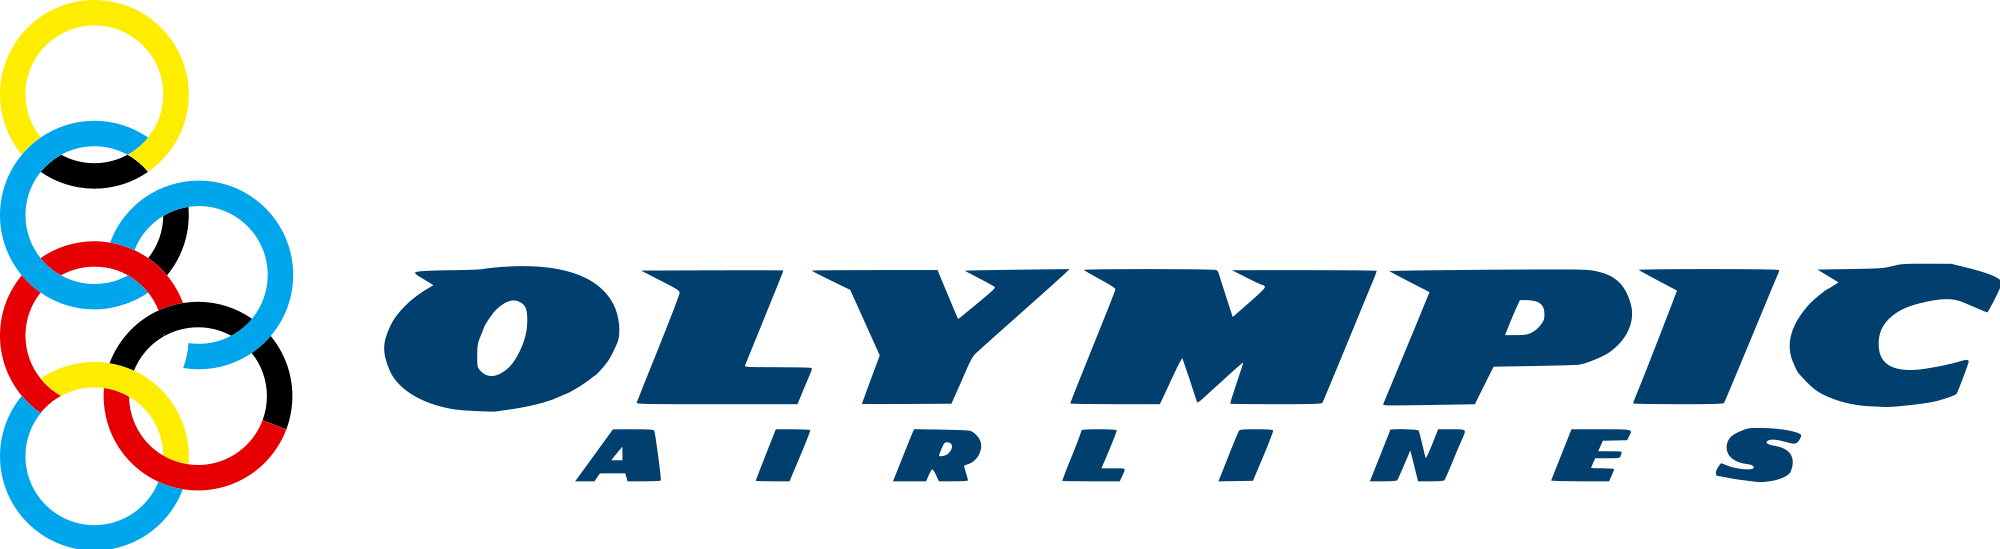 Greek Airline Logo - File:Olympic Airlines logo.png - Wikimedia Commons